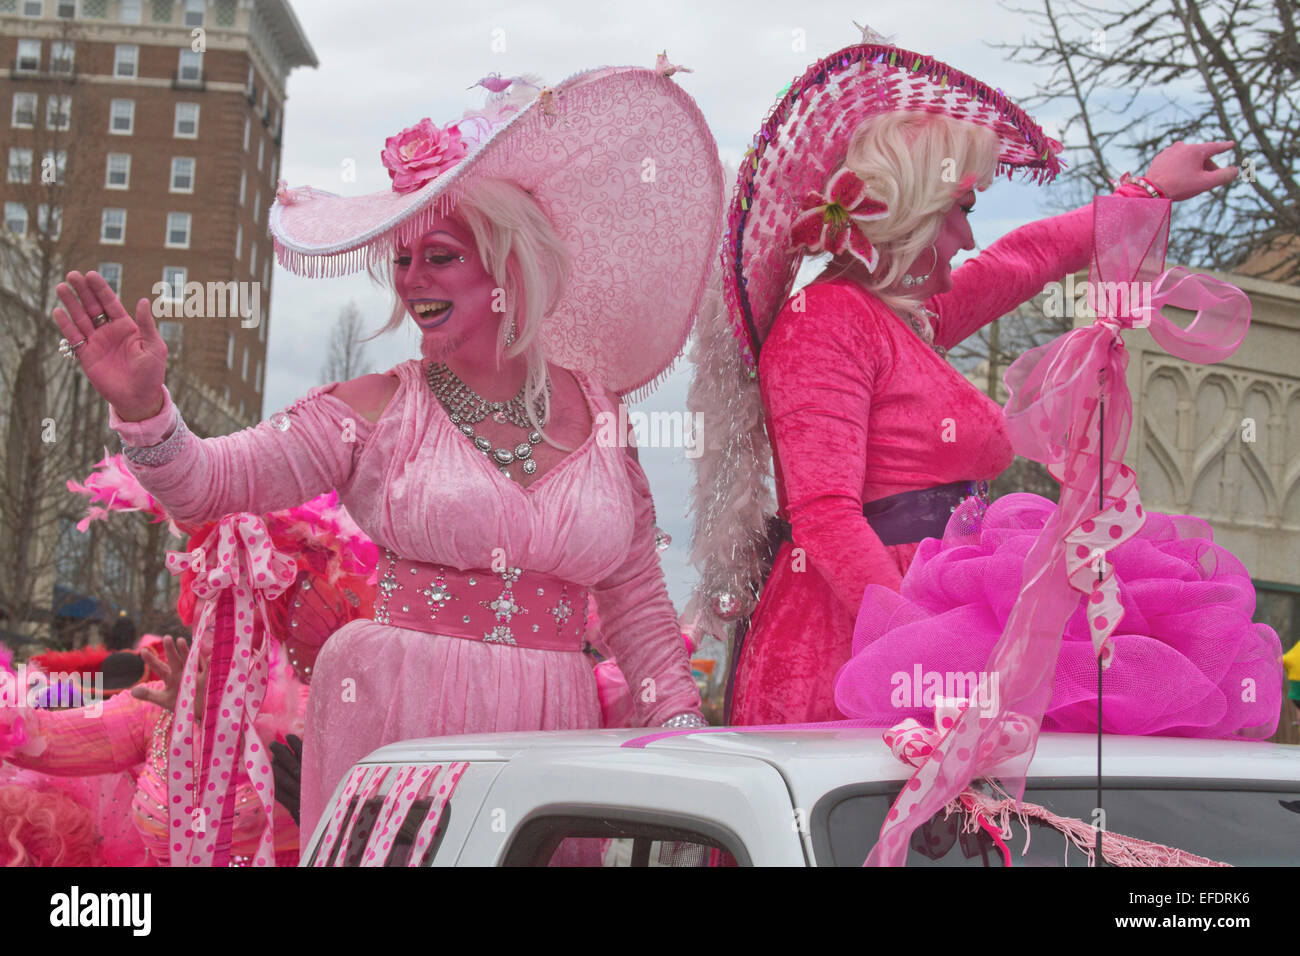 https://c8.alamy.com/comp/EFDRK6/two-frilly-costumed-ladies-all-in-pink-with-pink-skin-one-with-a-beard-EFDRK6.jpg